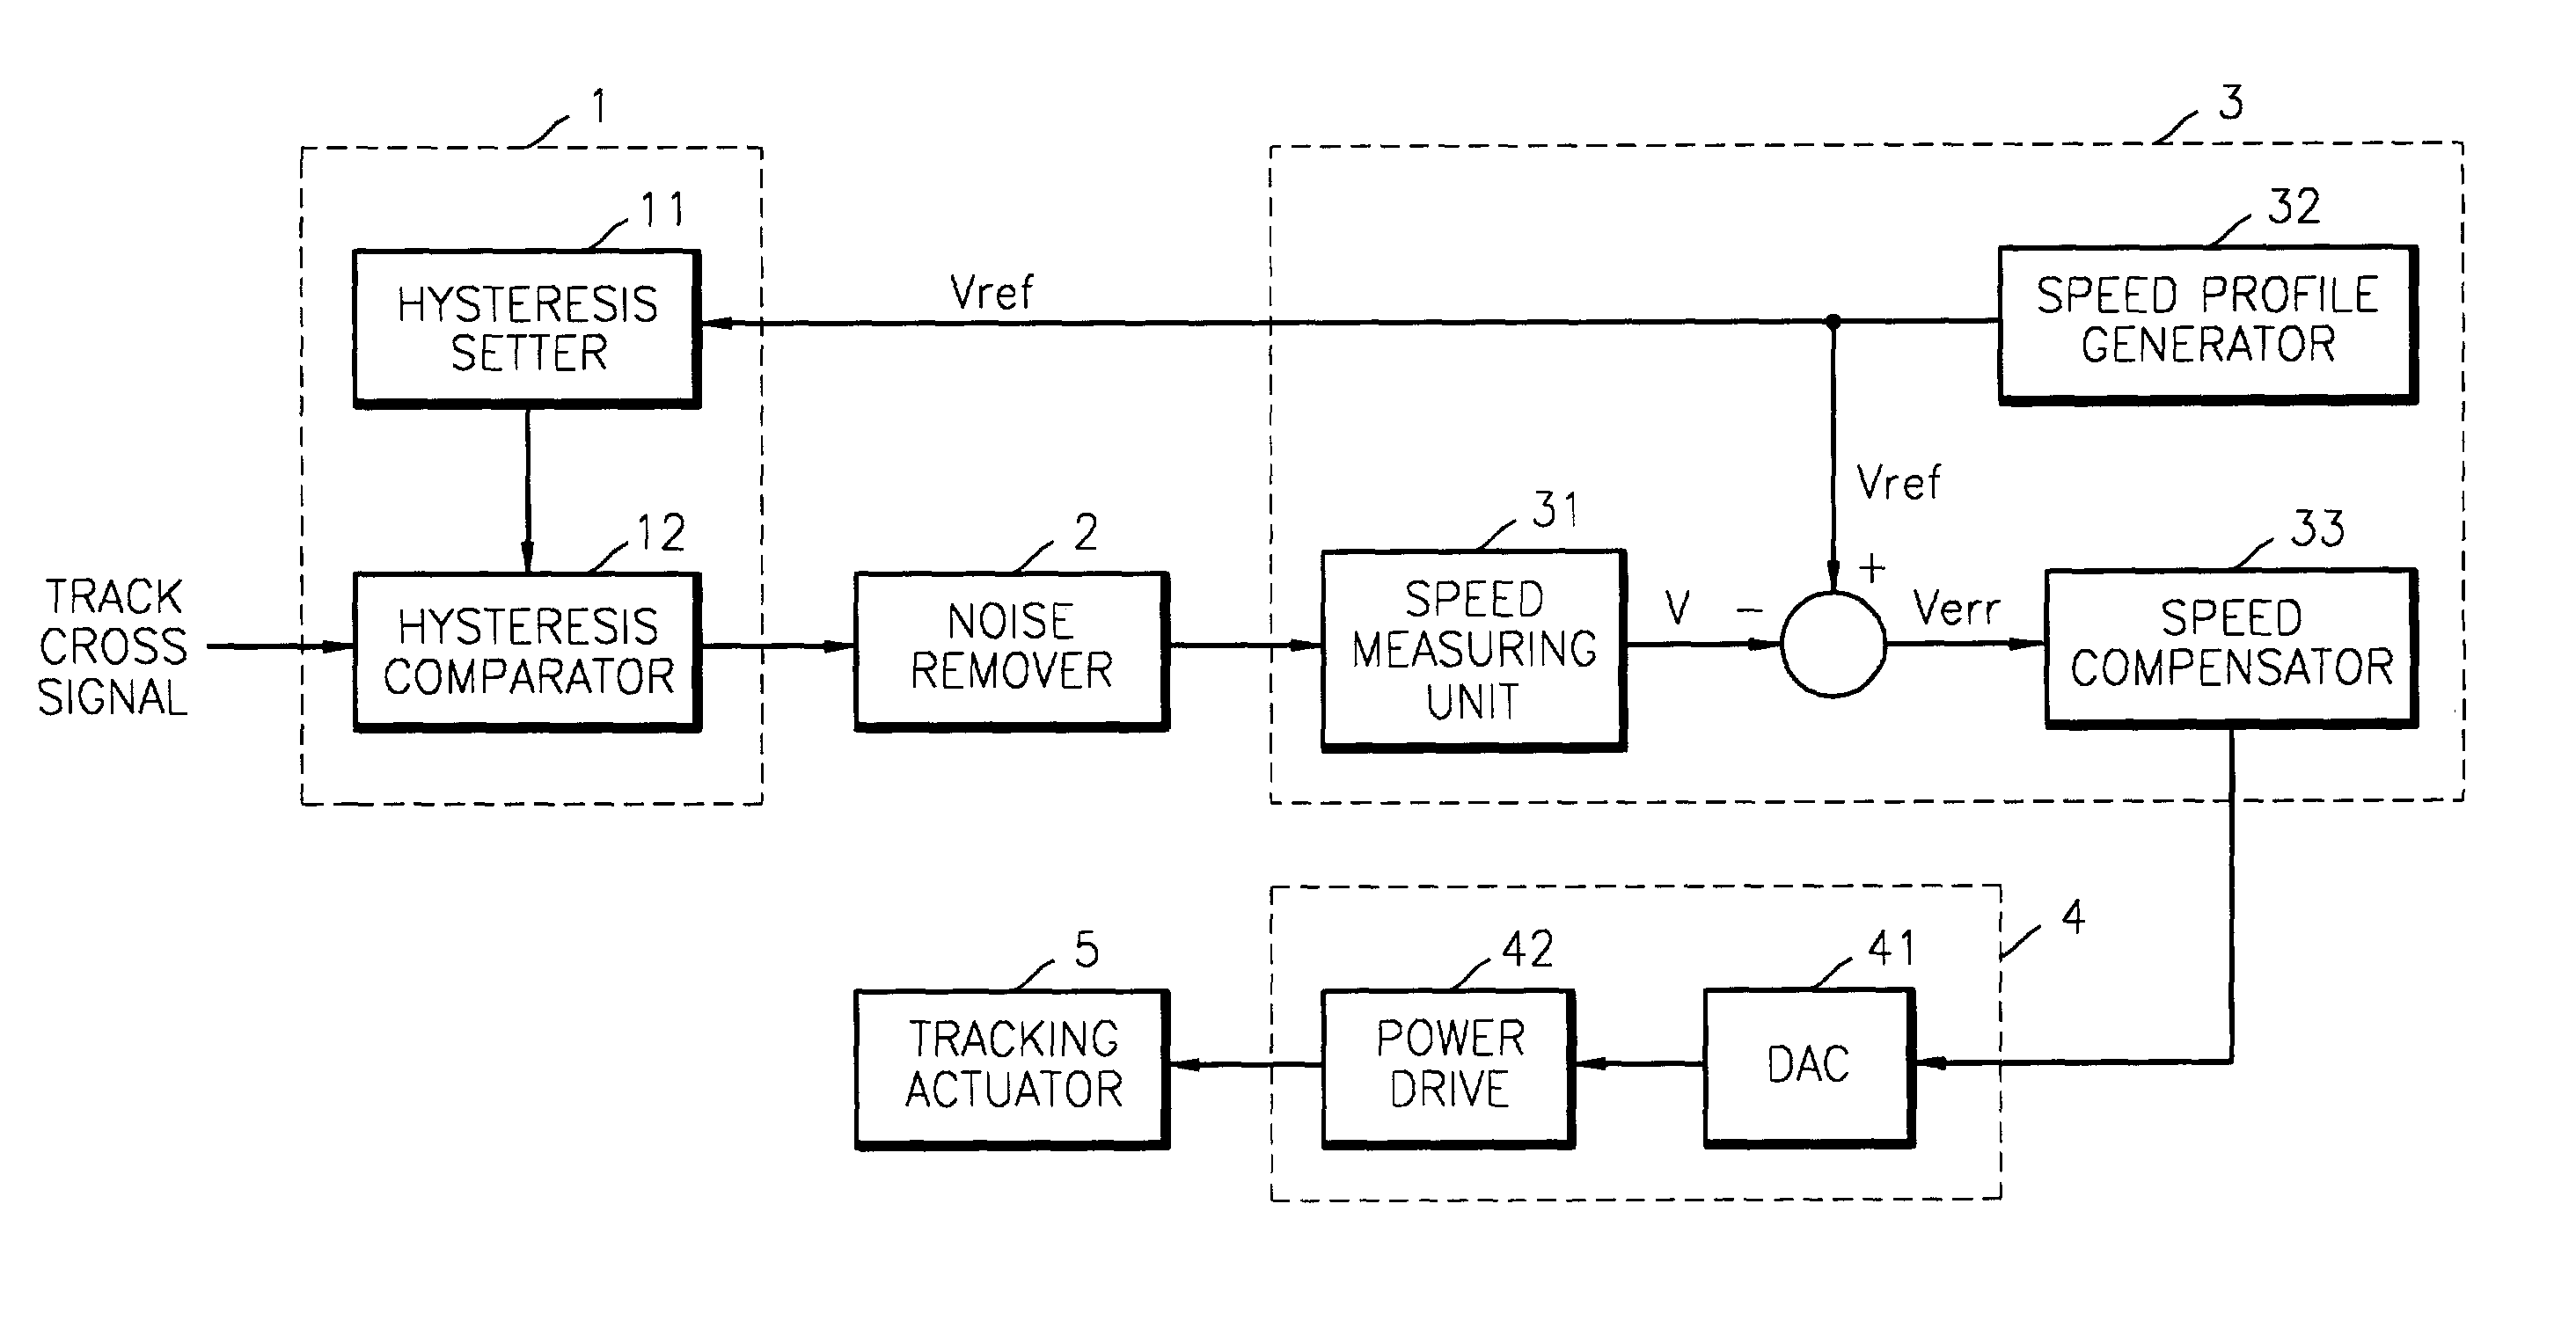 Method and apparatus for canceling glitch noise from track crossing signal